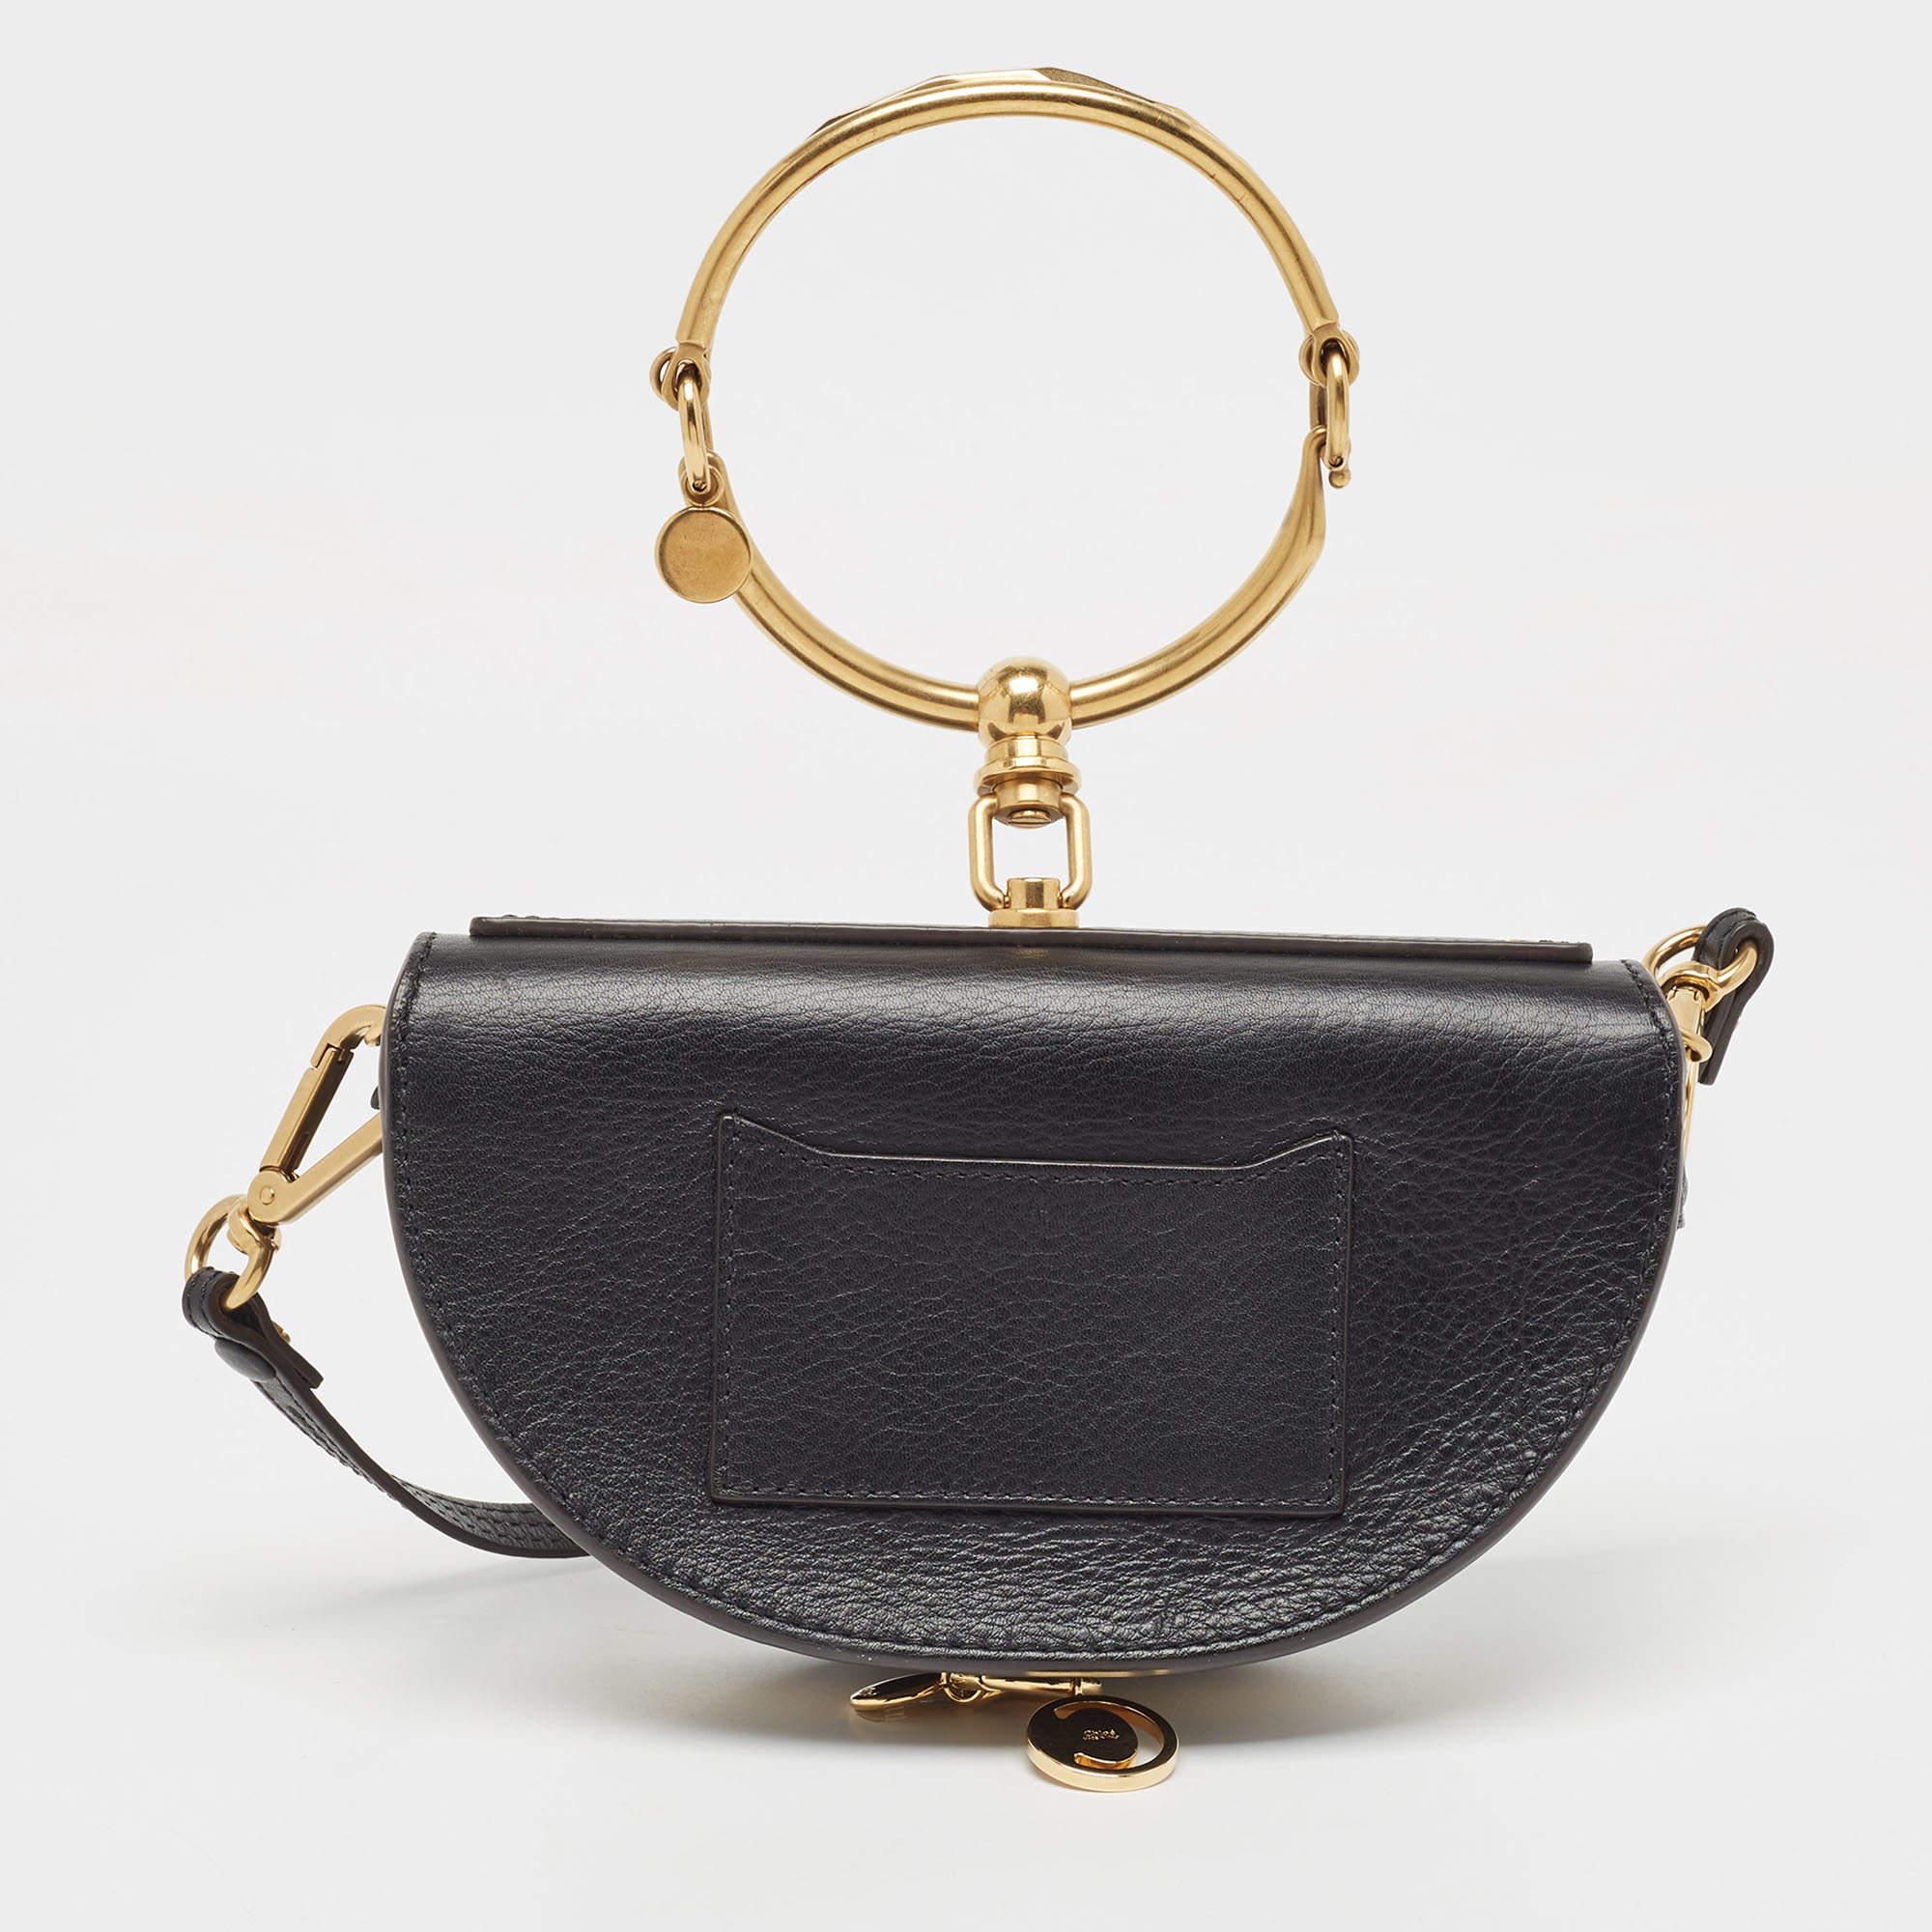 Loved by fashion influencers and celebs, this chic Nile bag by Chloé can become your most favorite bag, thanks to its unique half-moon-like shape and the bracelet handle. It has been crafted from leather and styled with a front flap that opens to an